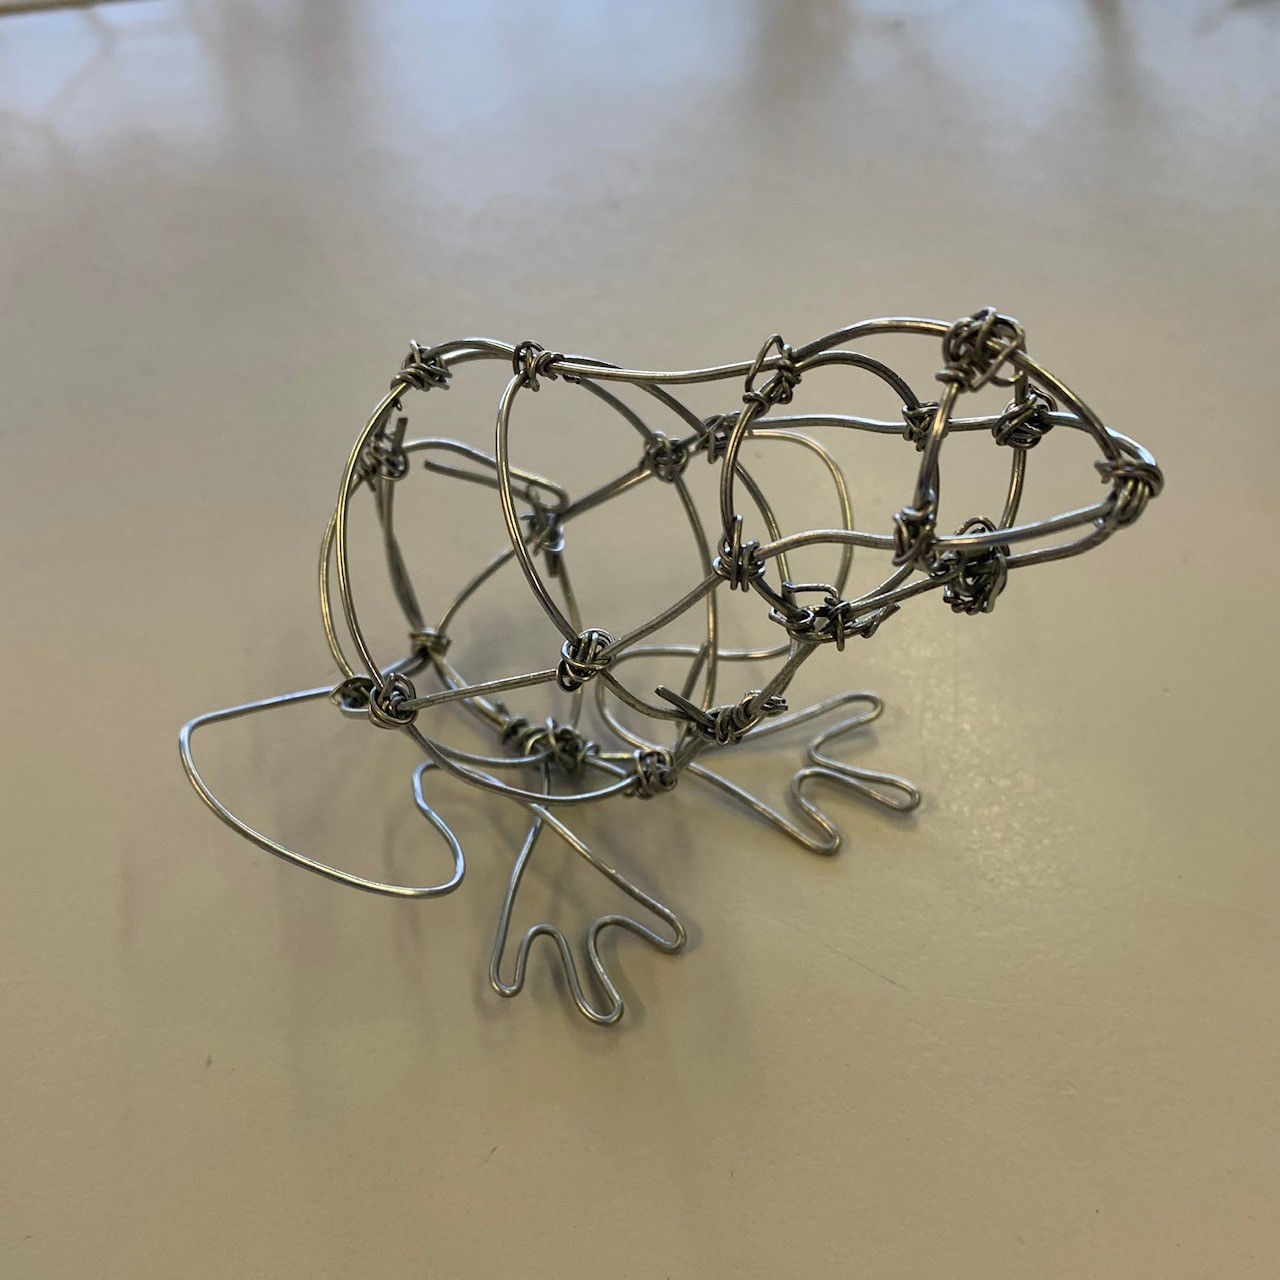 Wire Workshop with Tania Spencer